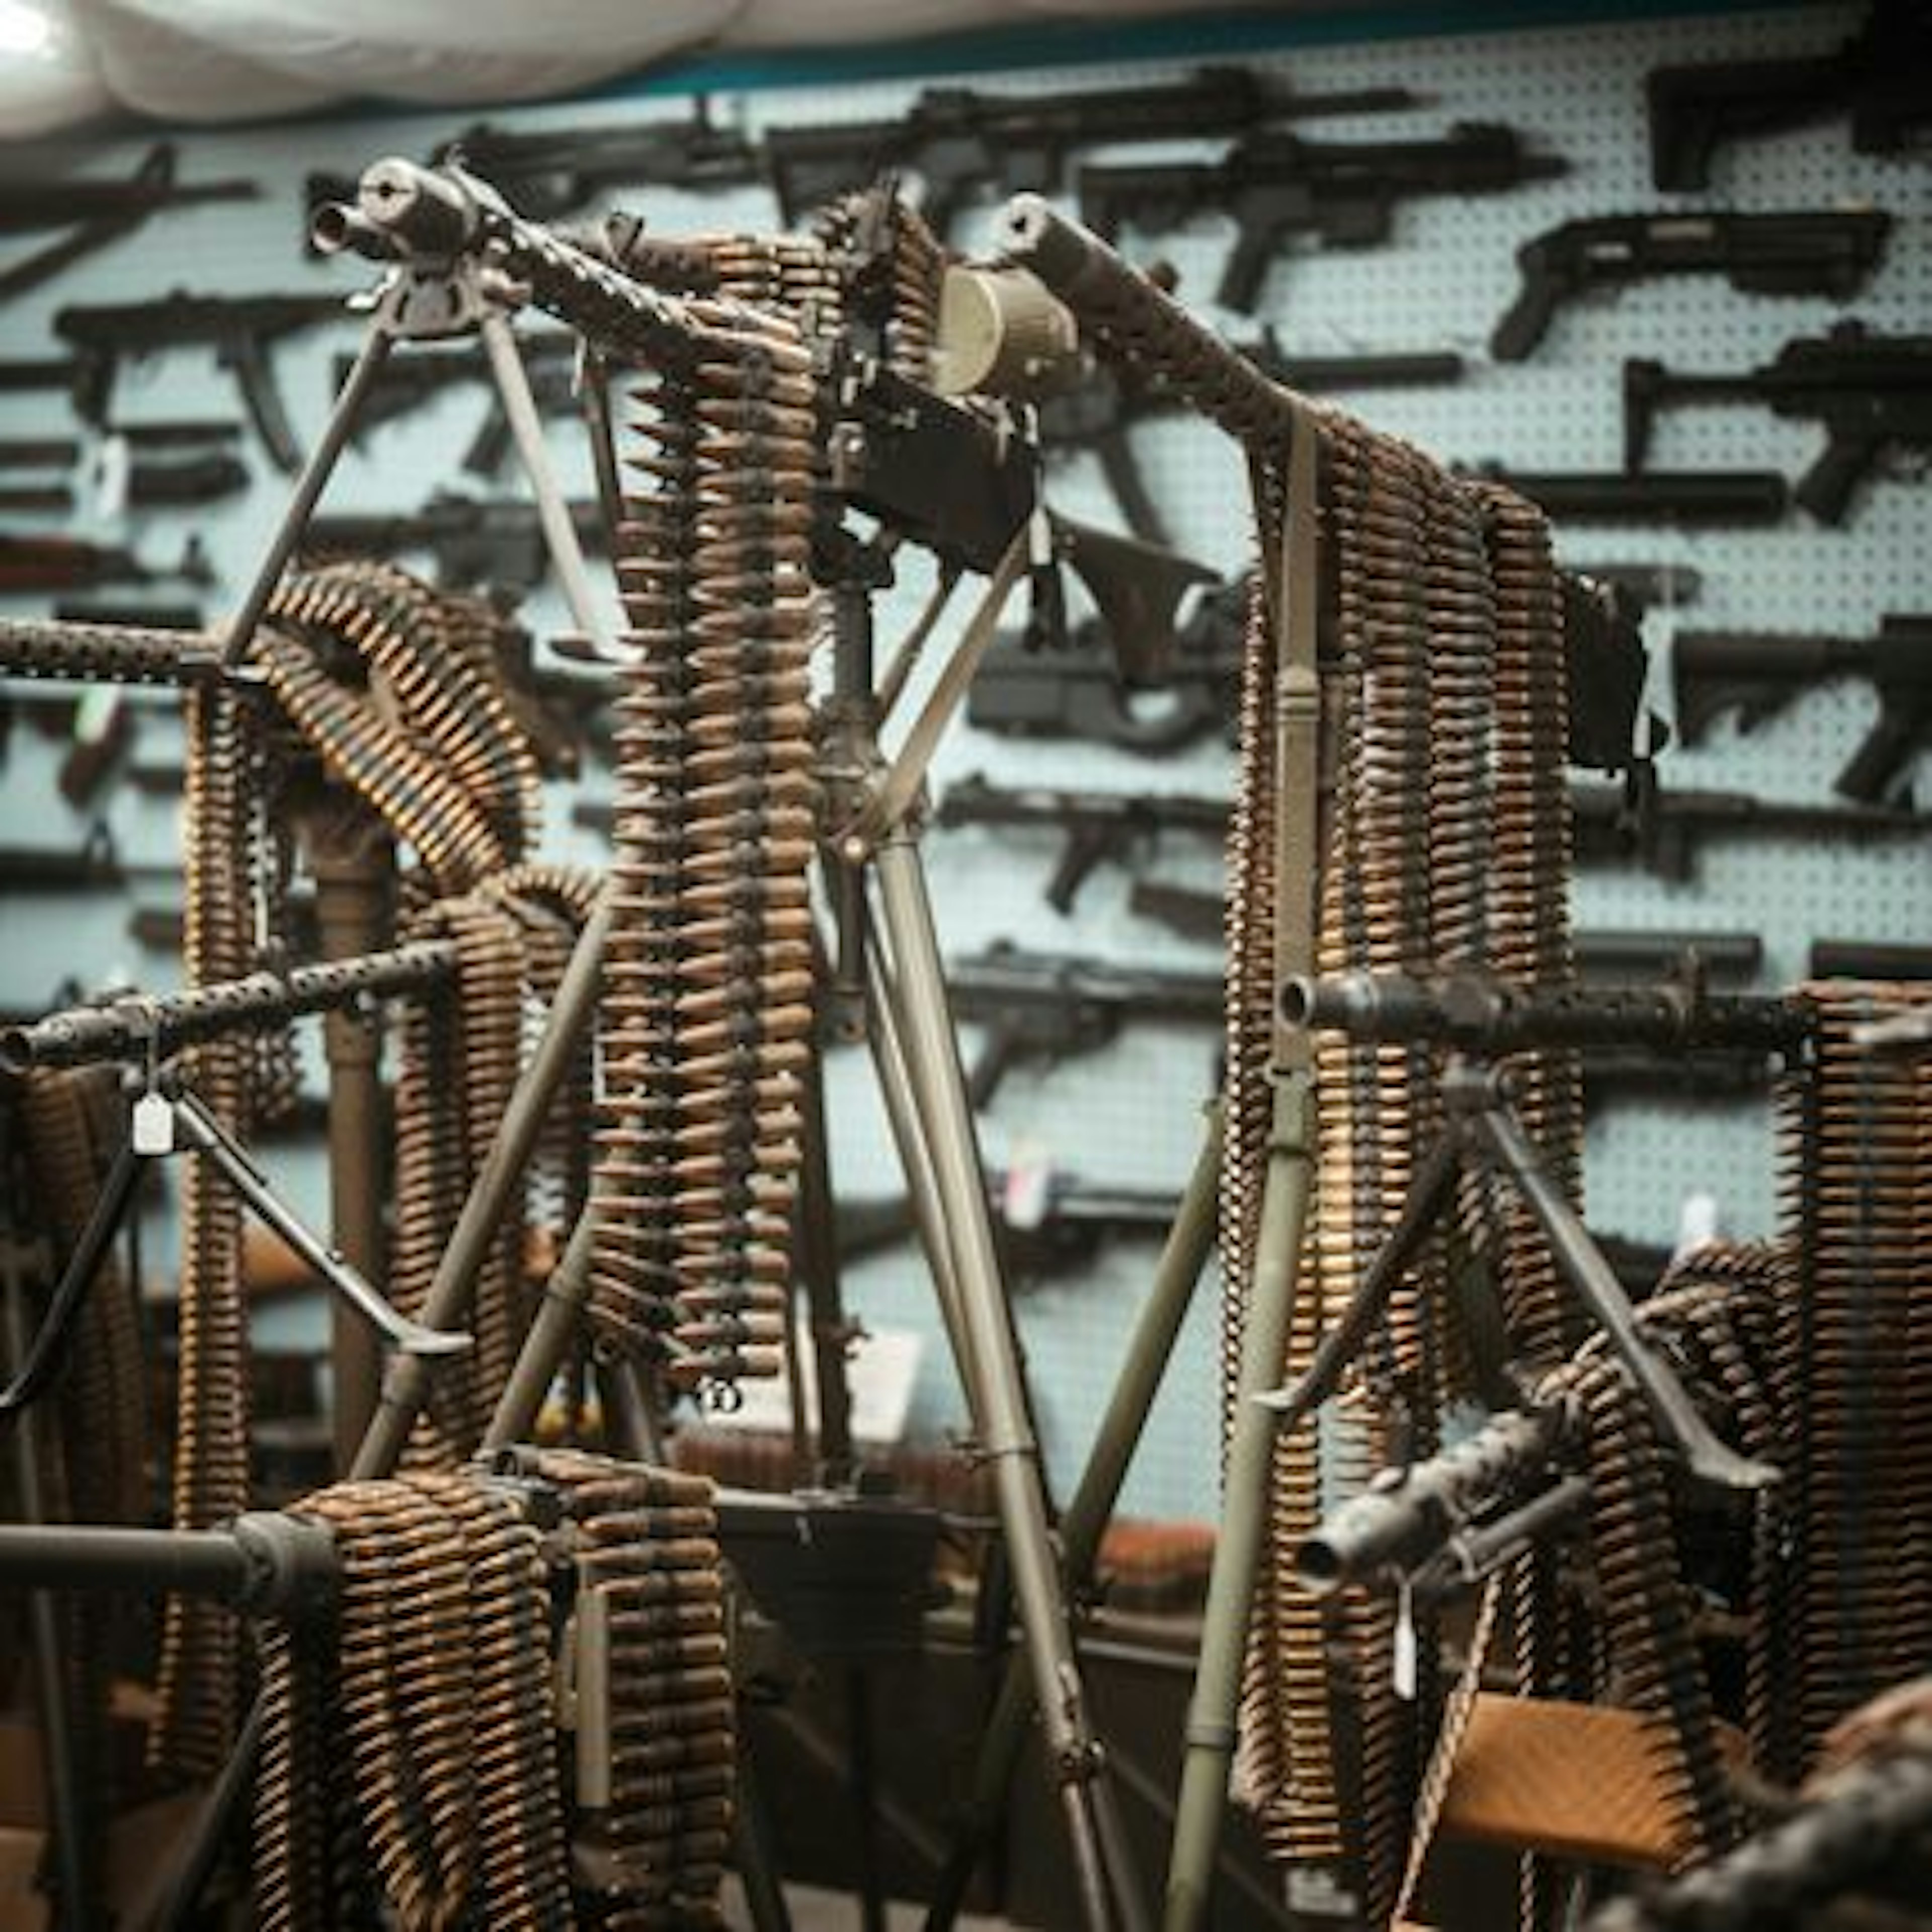 Gallery: Inside Dragonman's Military Museum